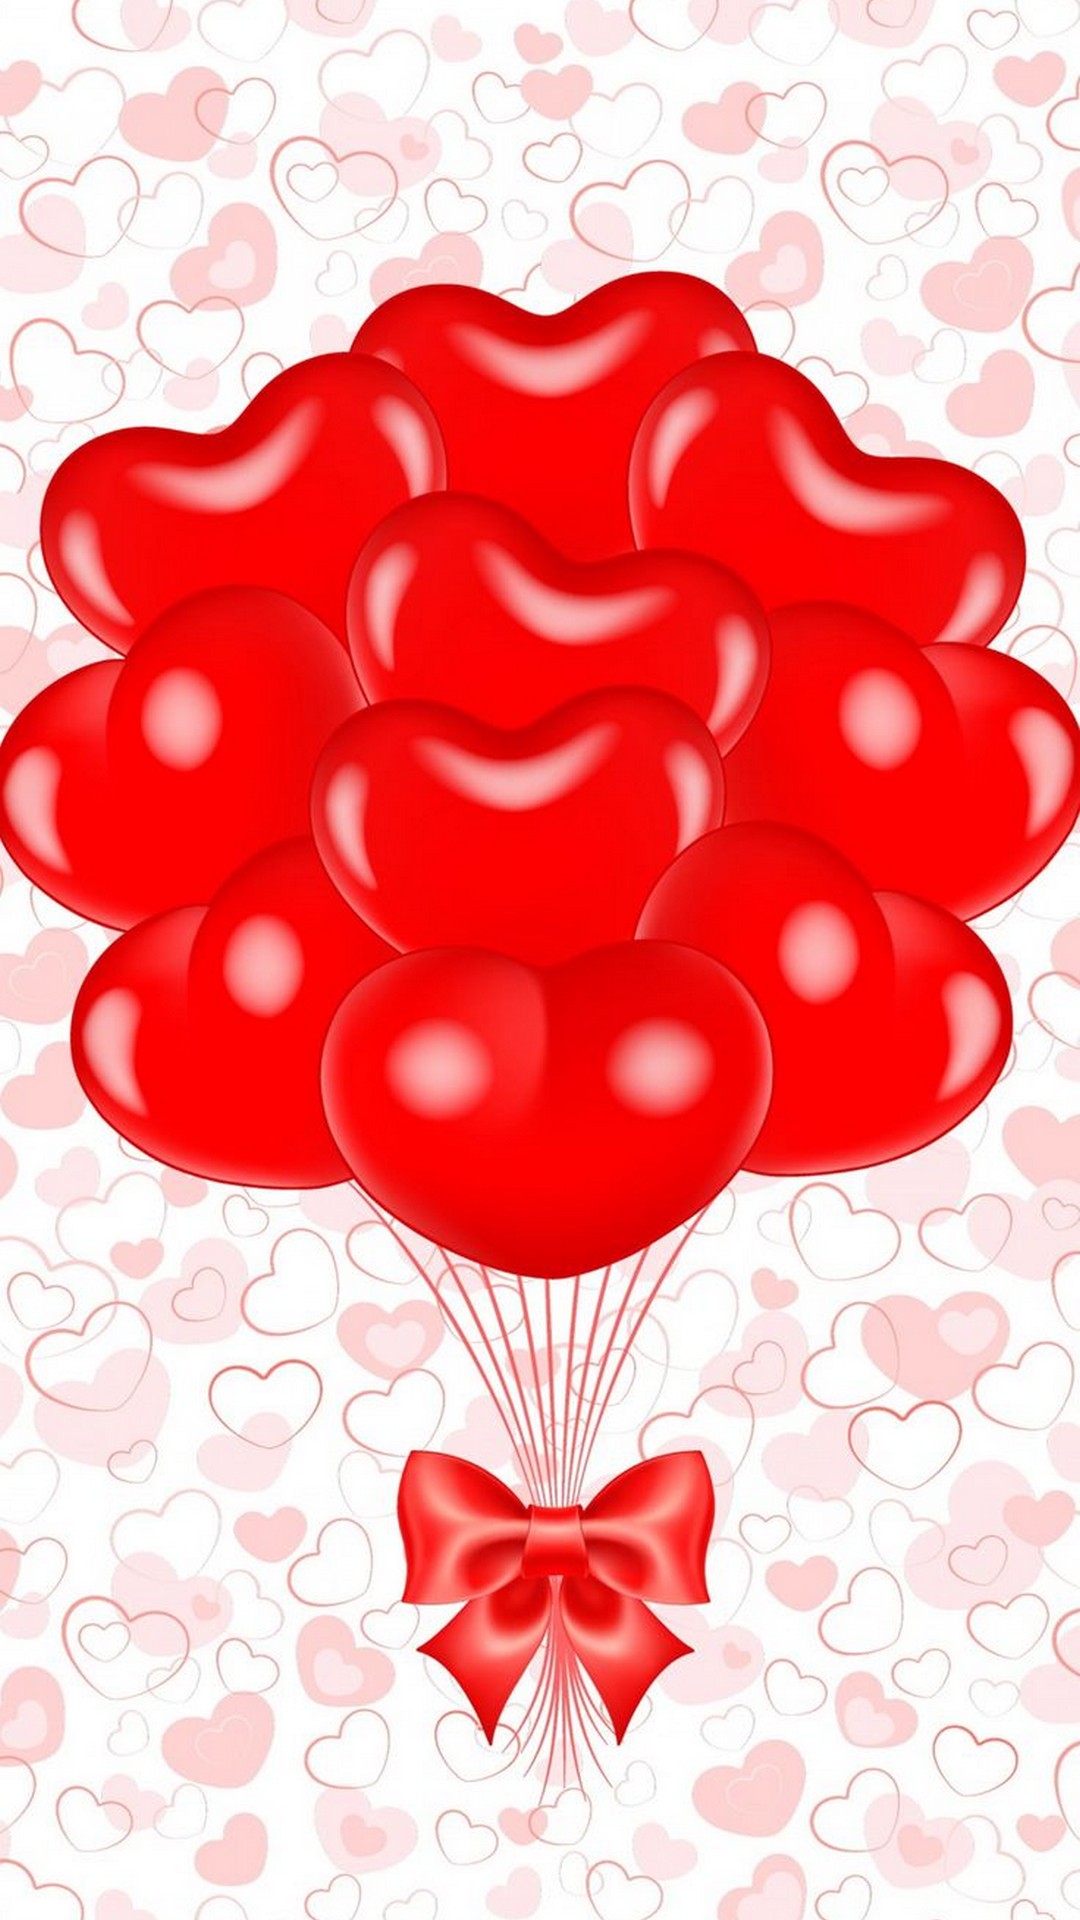 Wallpaper Valentine Images Android with HD resolution 1080x1920